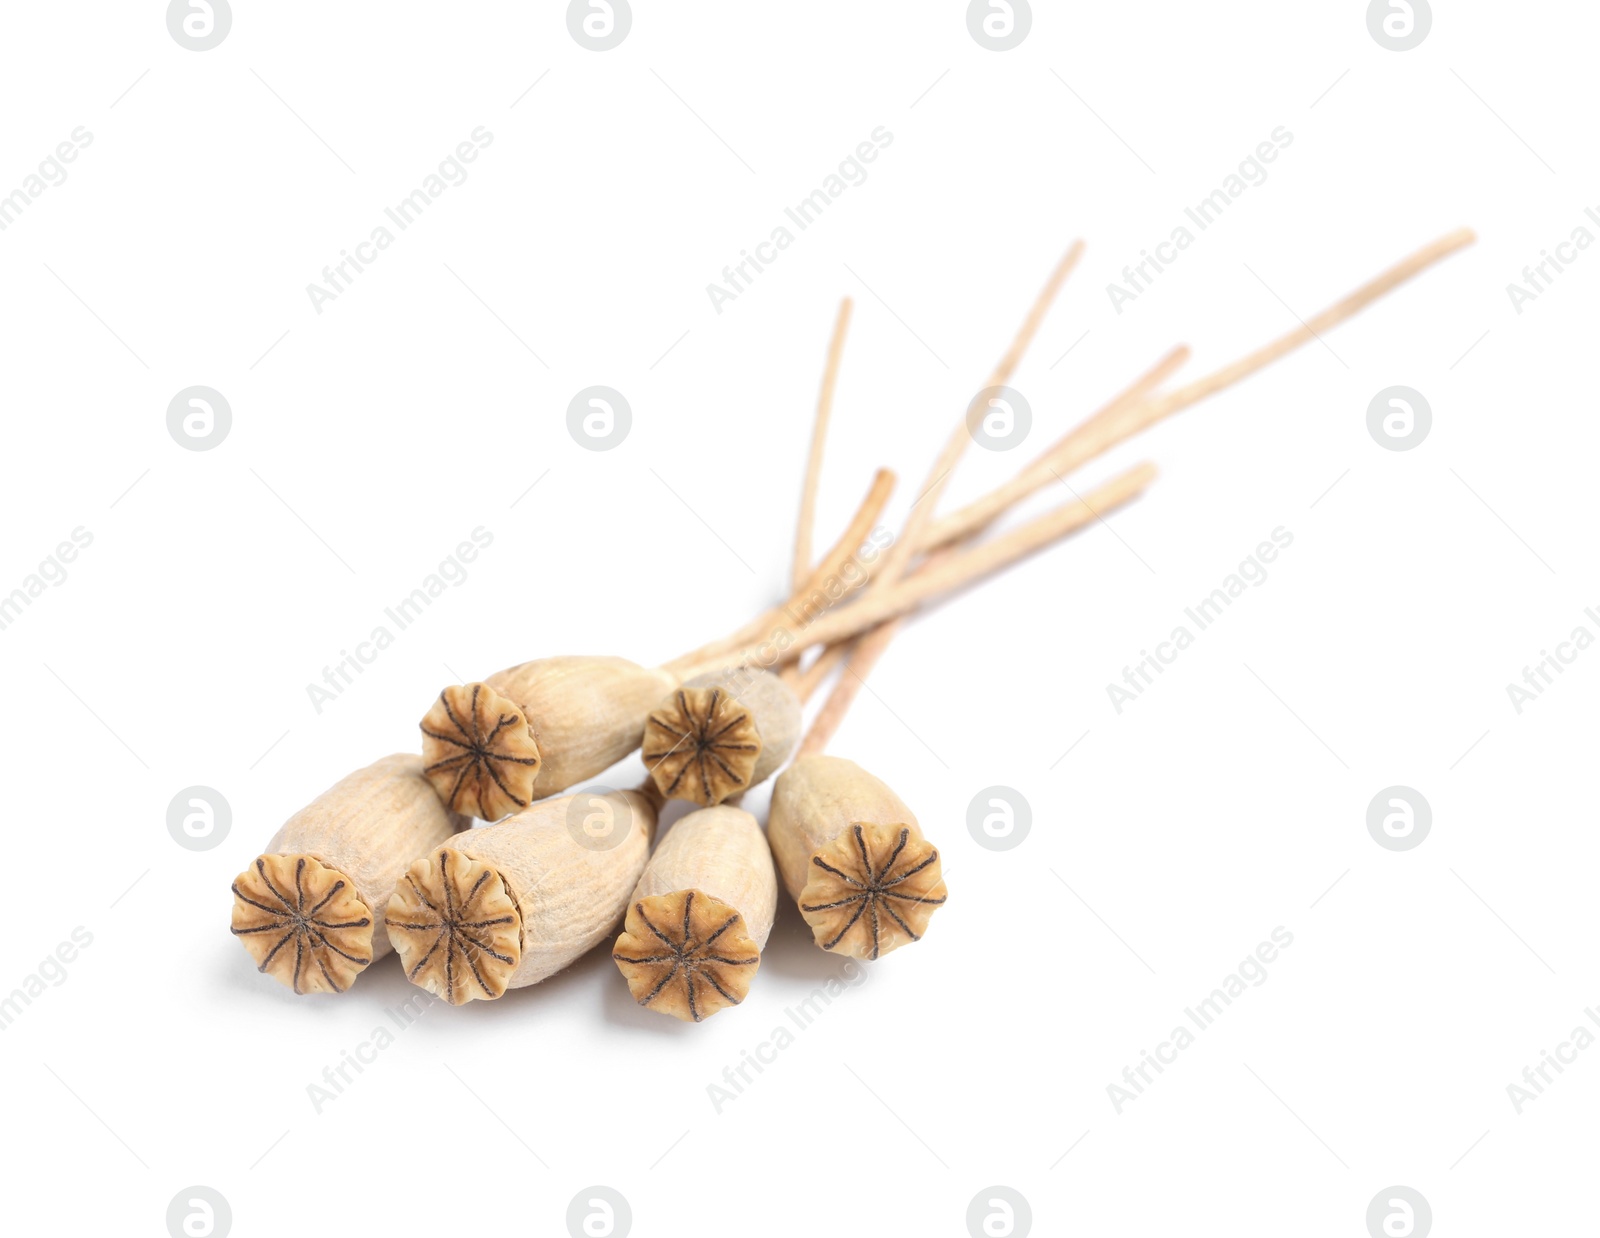 Photo of Dry poppy heads with seeds on white background